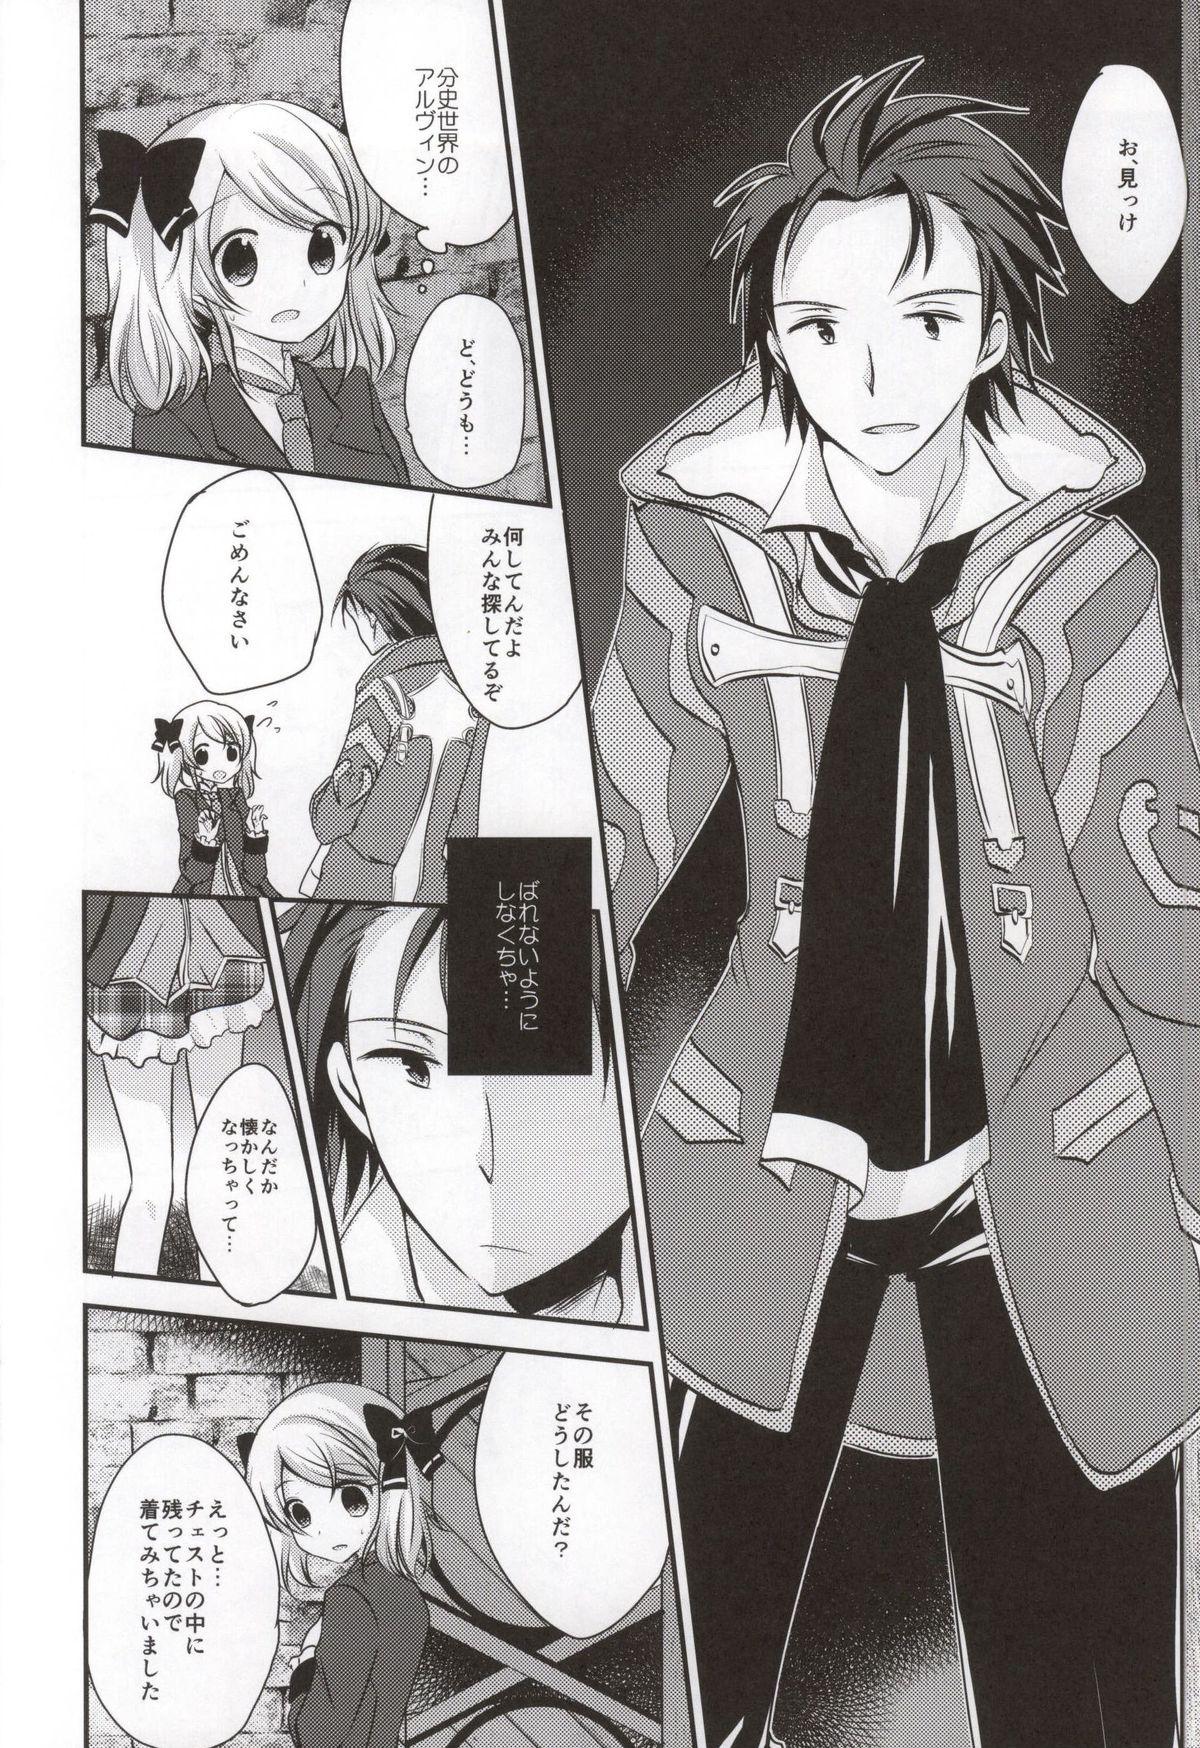 Gang Gekijou Another - Tales of xillia Buttplug - Page 6